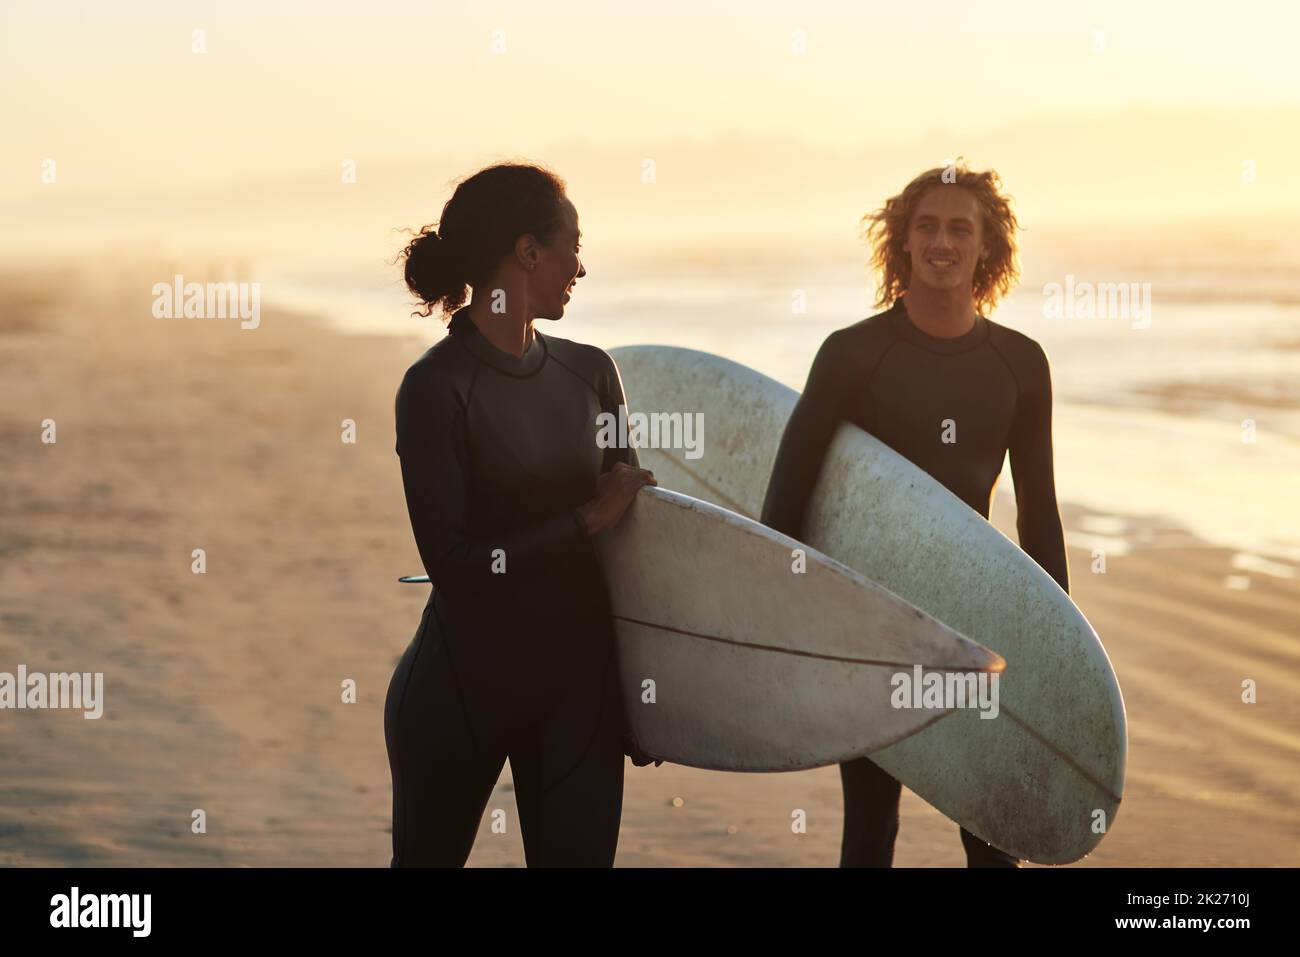 The beach is our happy place. Shot of a cheerful young couple going surfing at the beach. Stock Photo